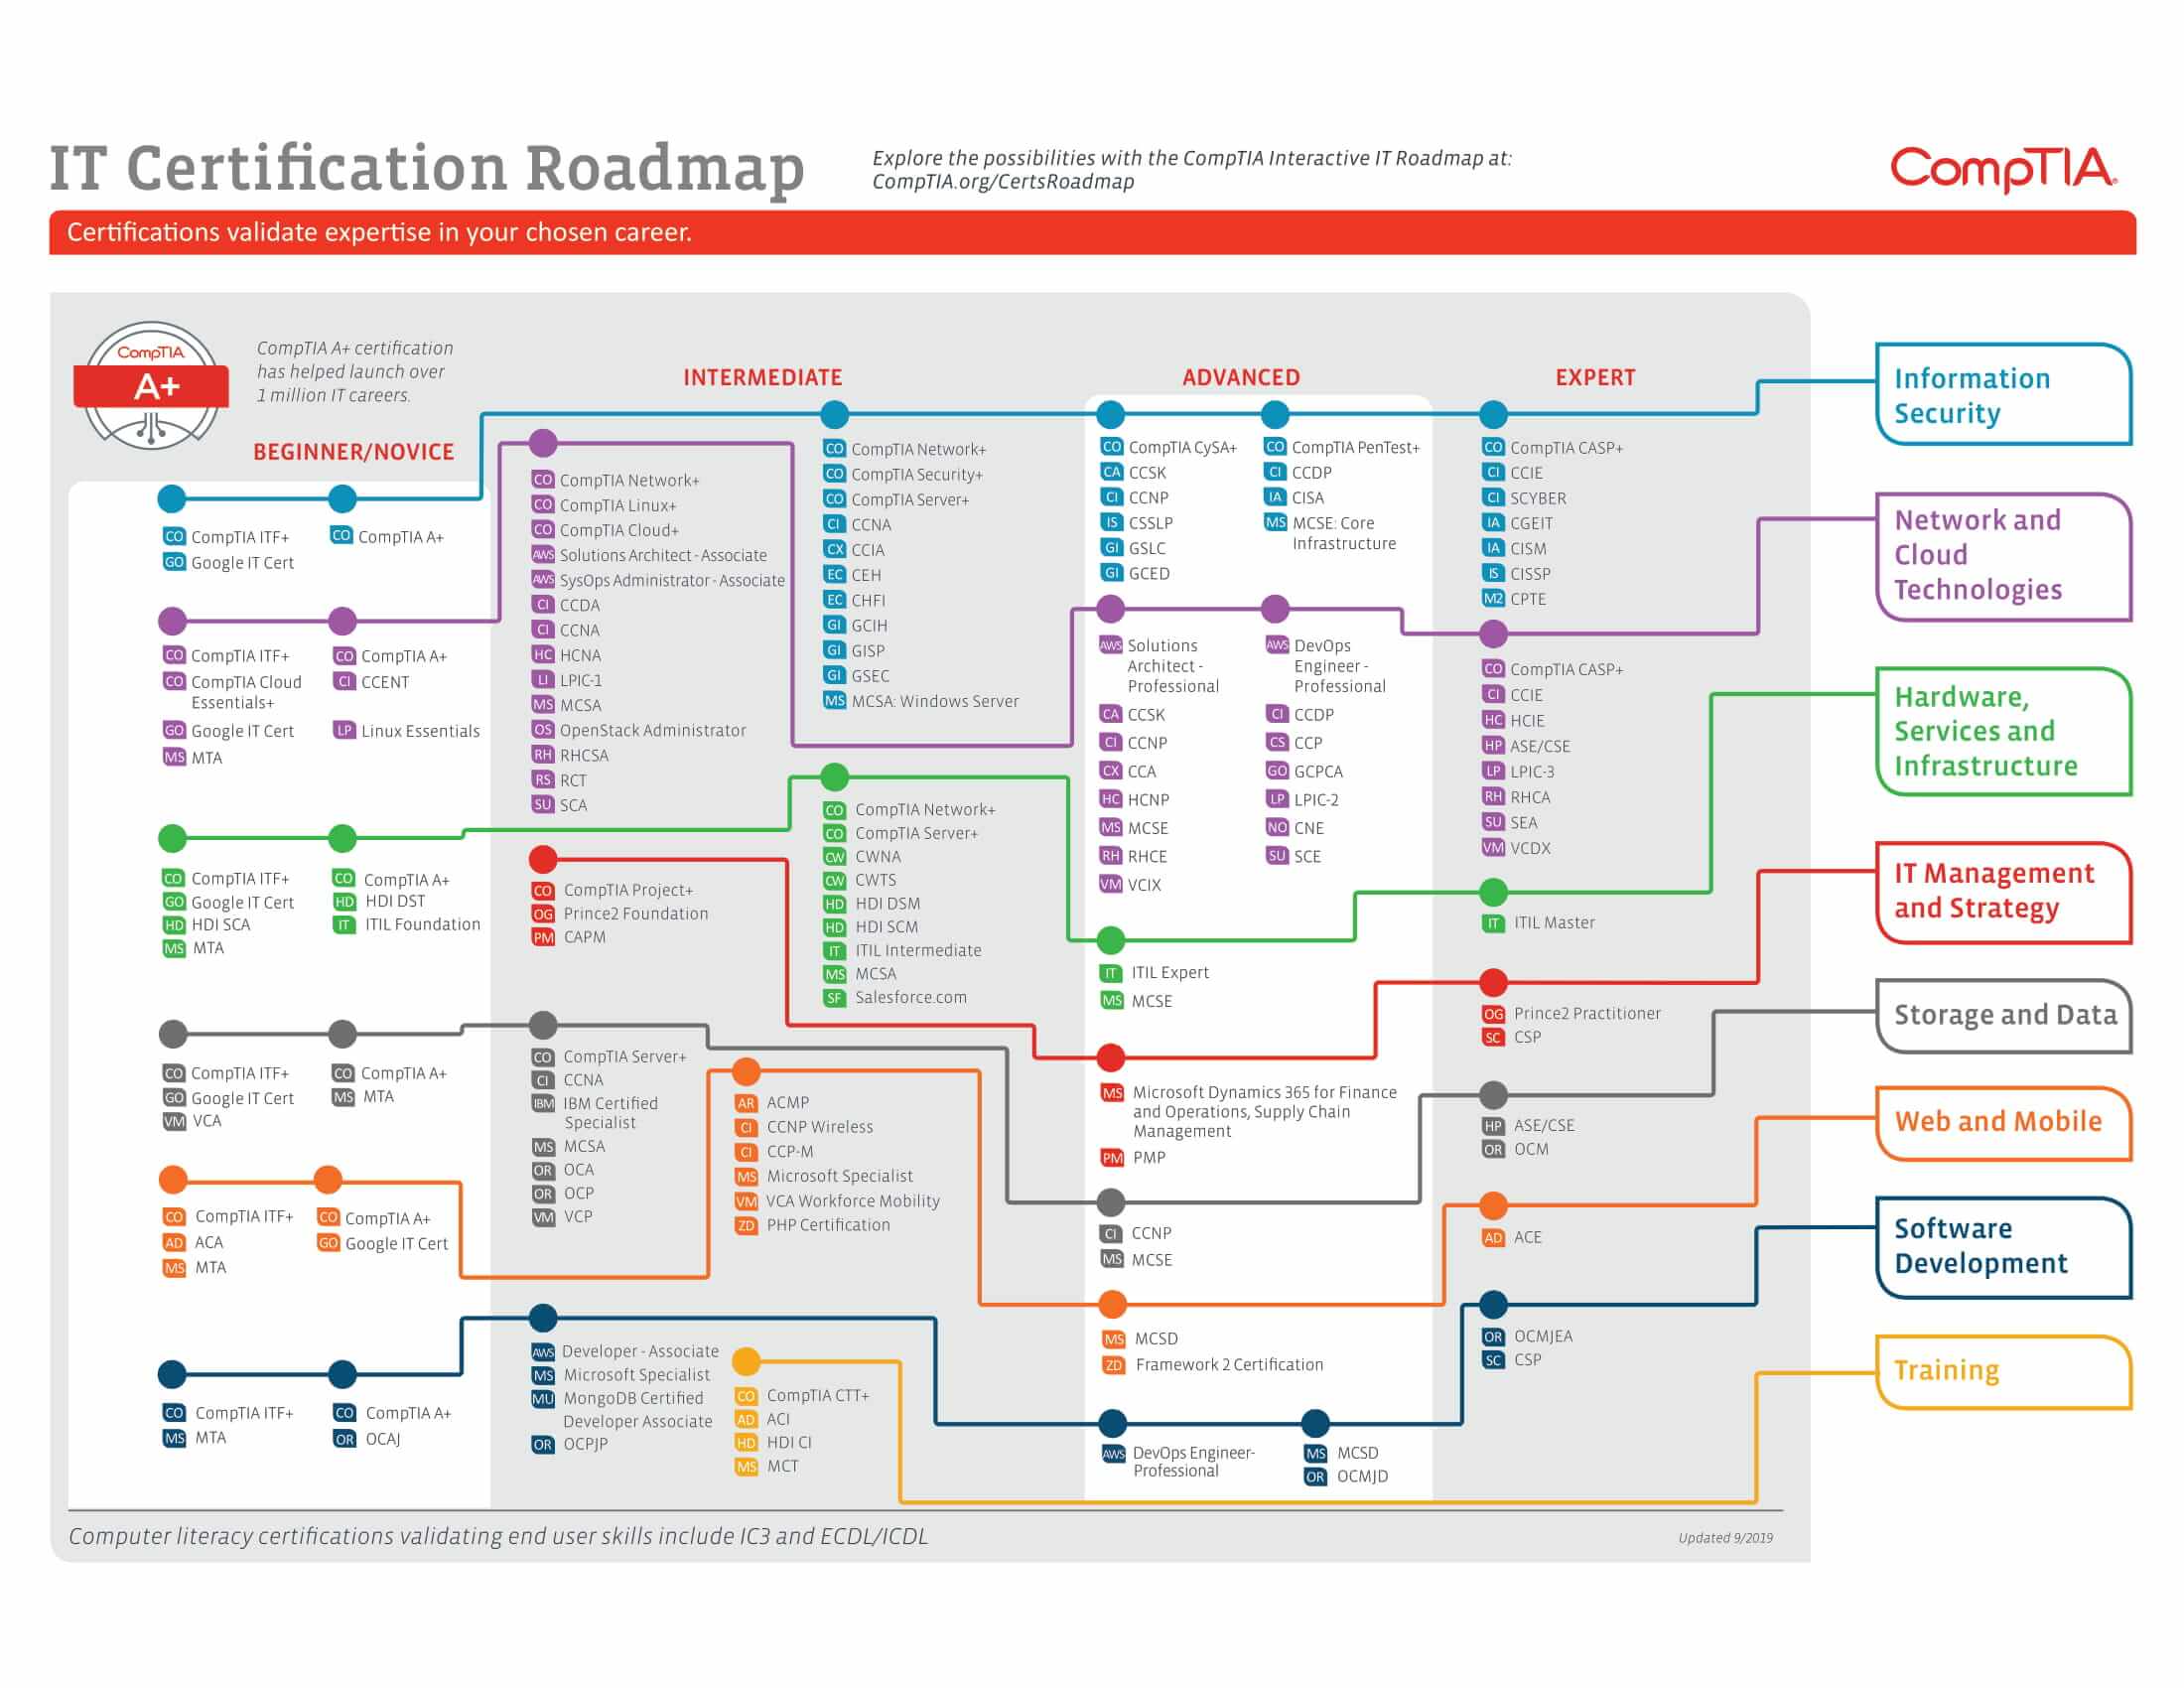 IT Certification Roadmap by CompTIA (2020) - Page 1